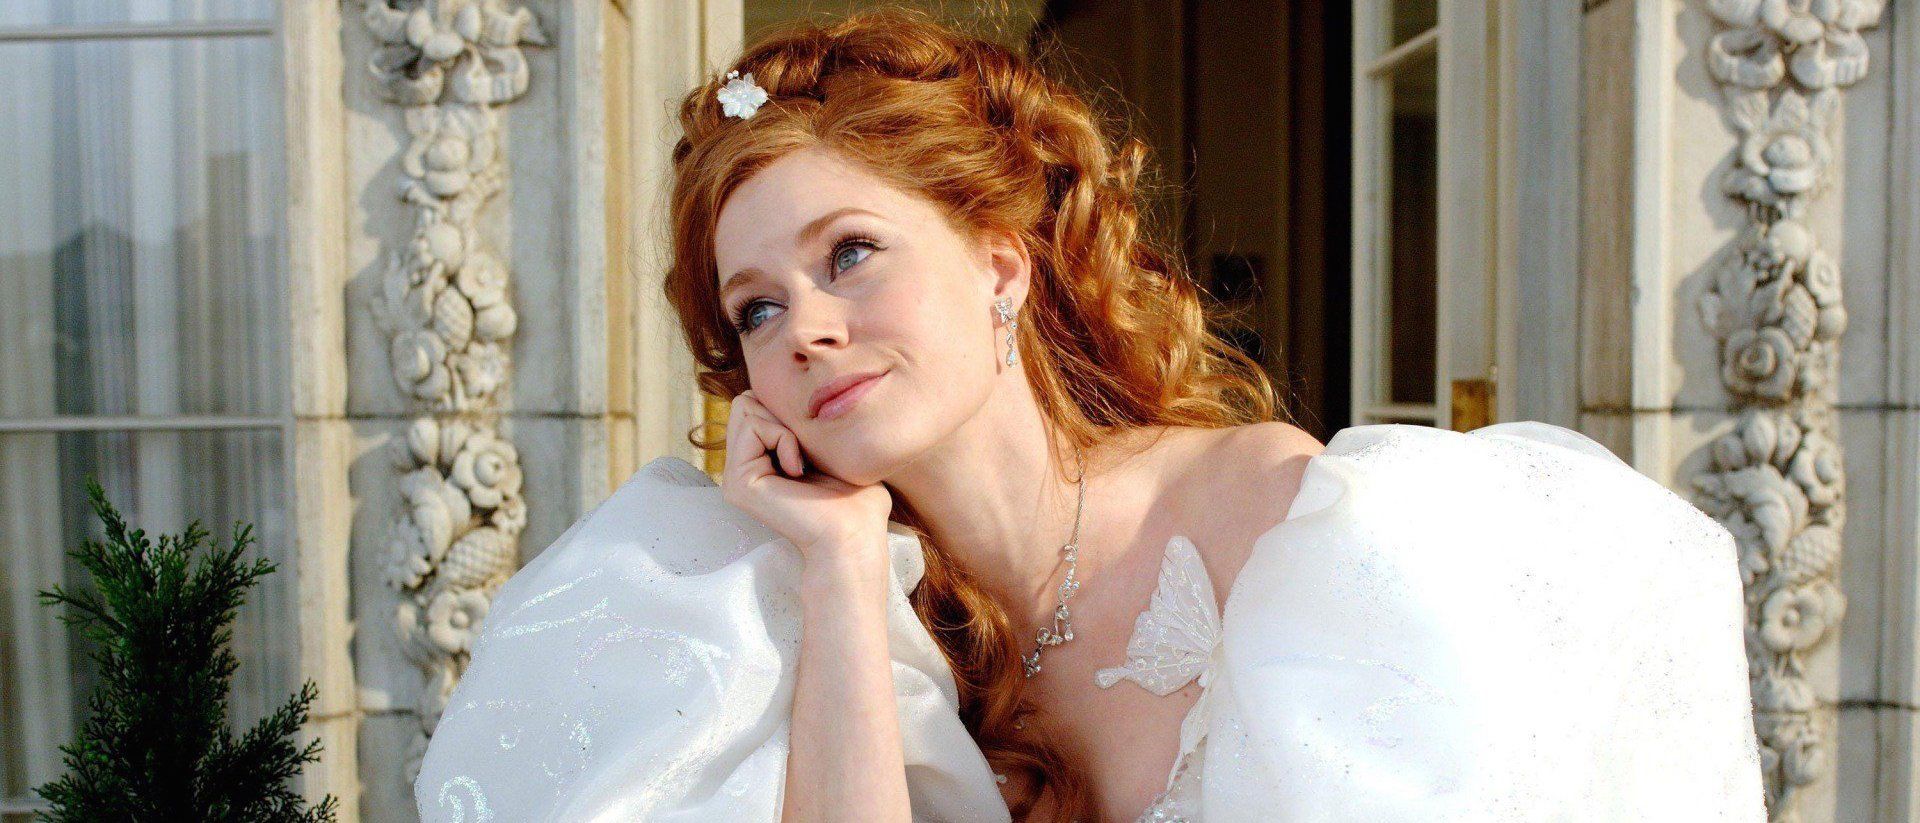 You can now channel Emma Stone with this enchanting wedding dress